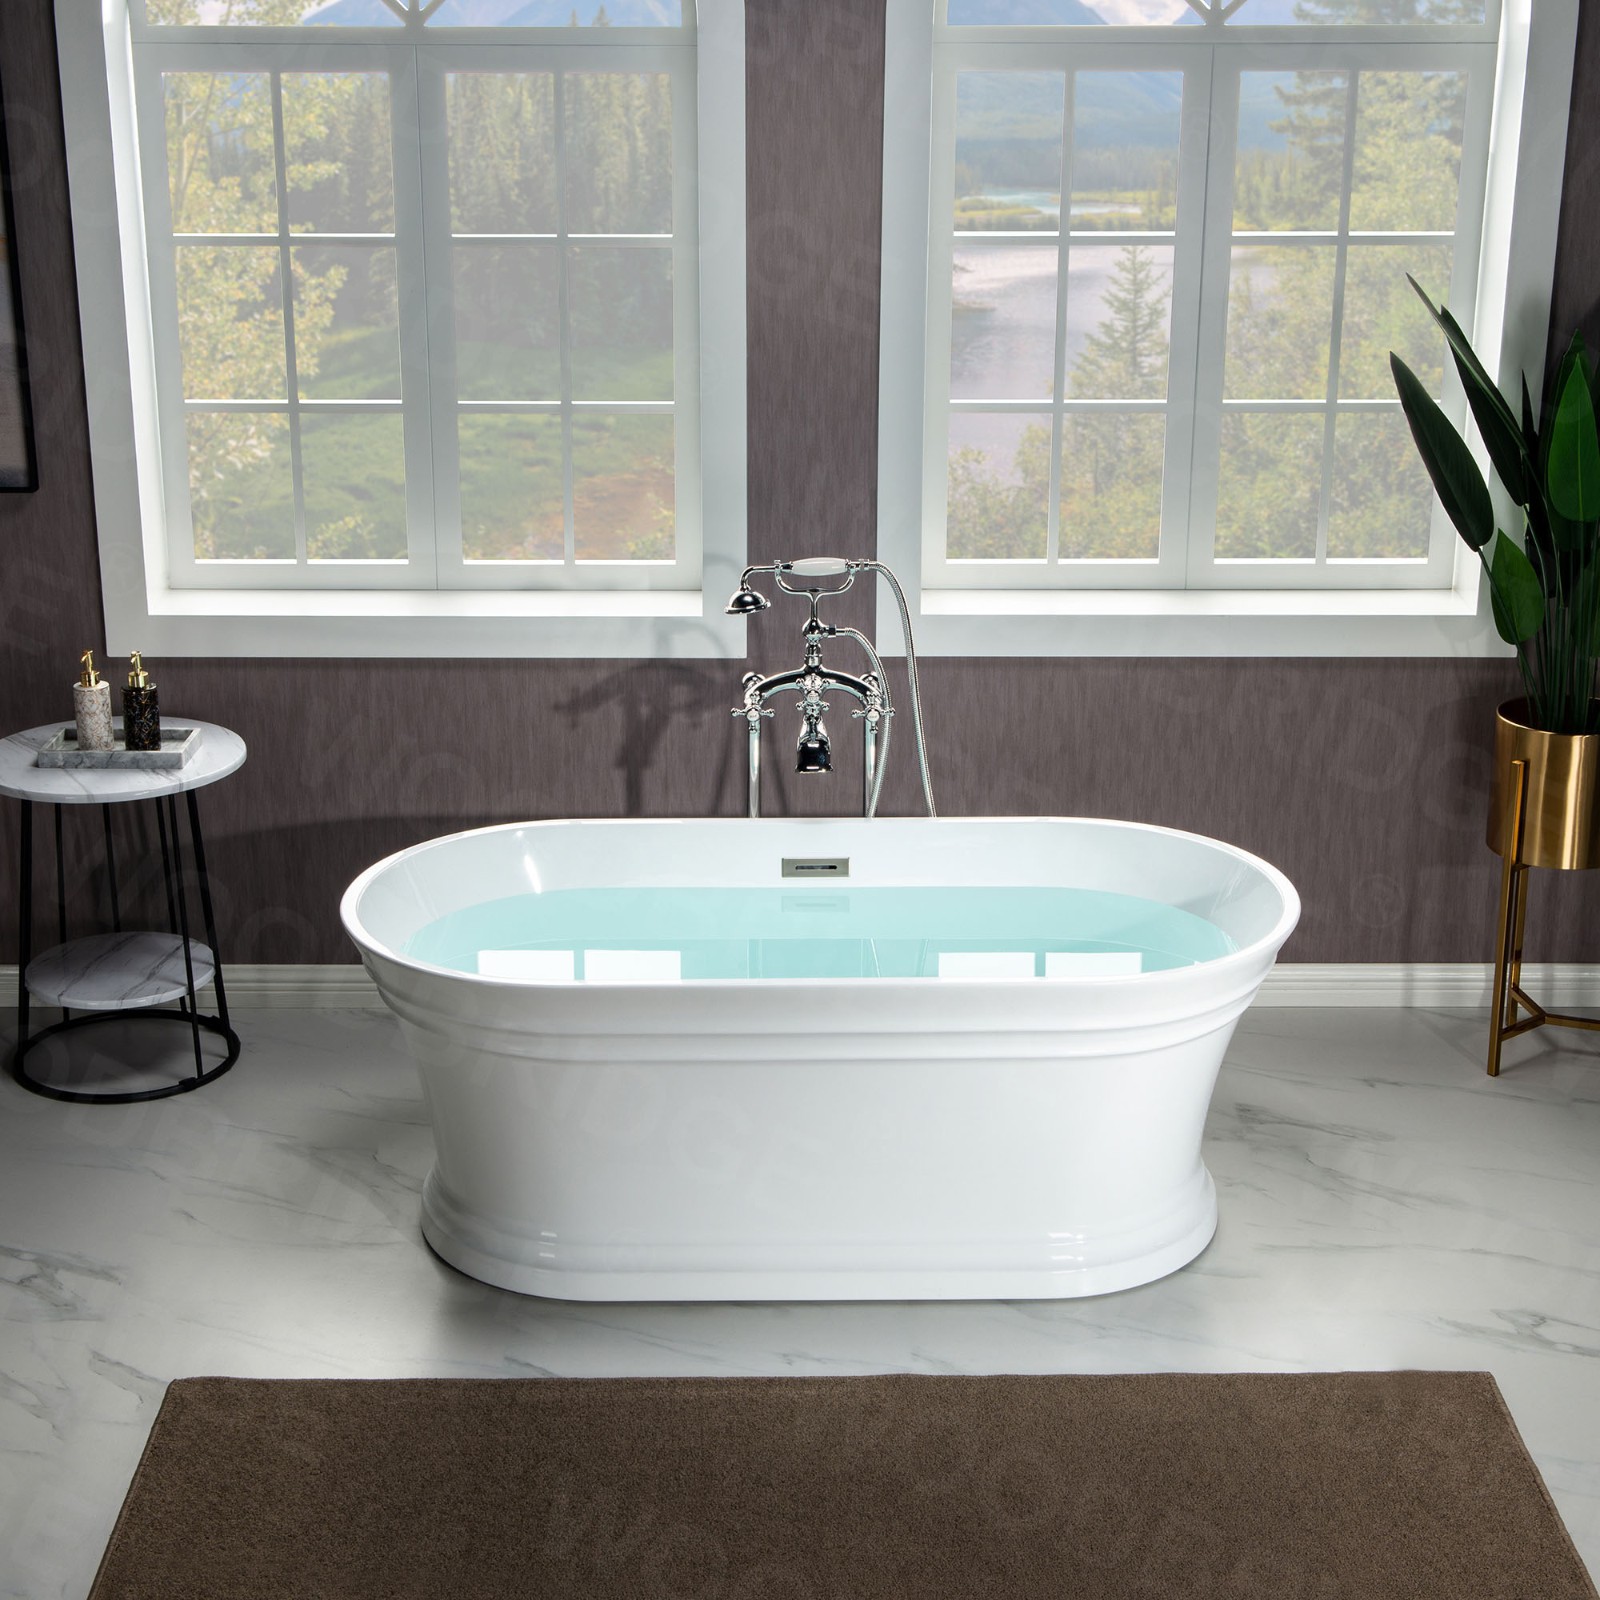  WOODBRIDGE 59 in. Freestanding Double Ended Acrylic Soaking Bathtub with Center Drain Assembly and Overflow, BTA1536/B1536, Glossy White_7855